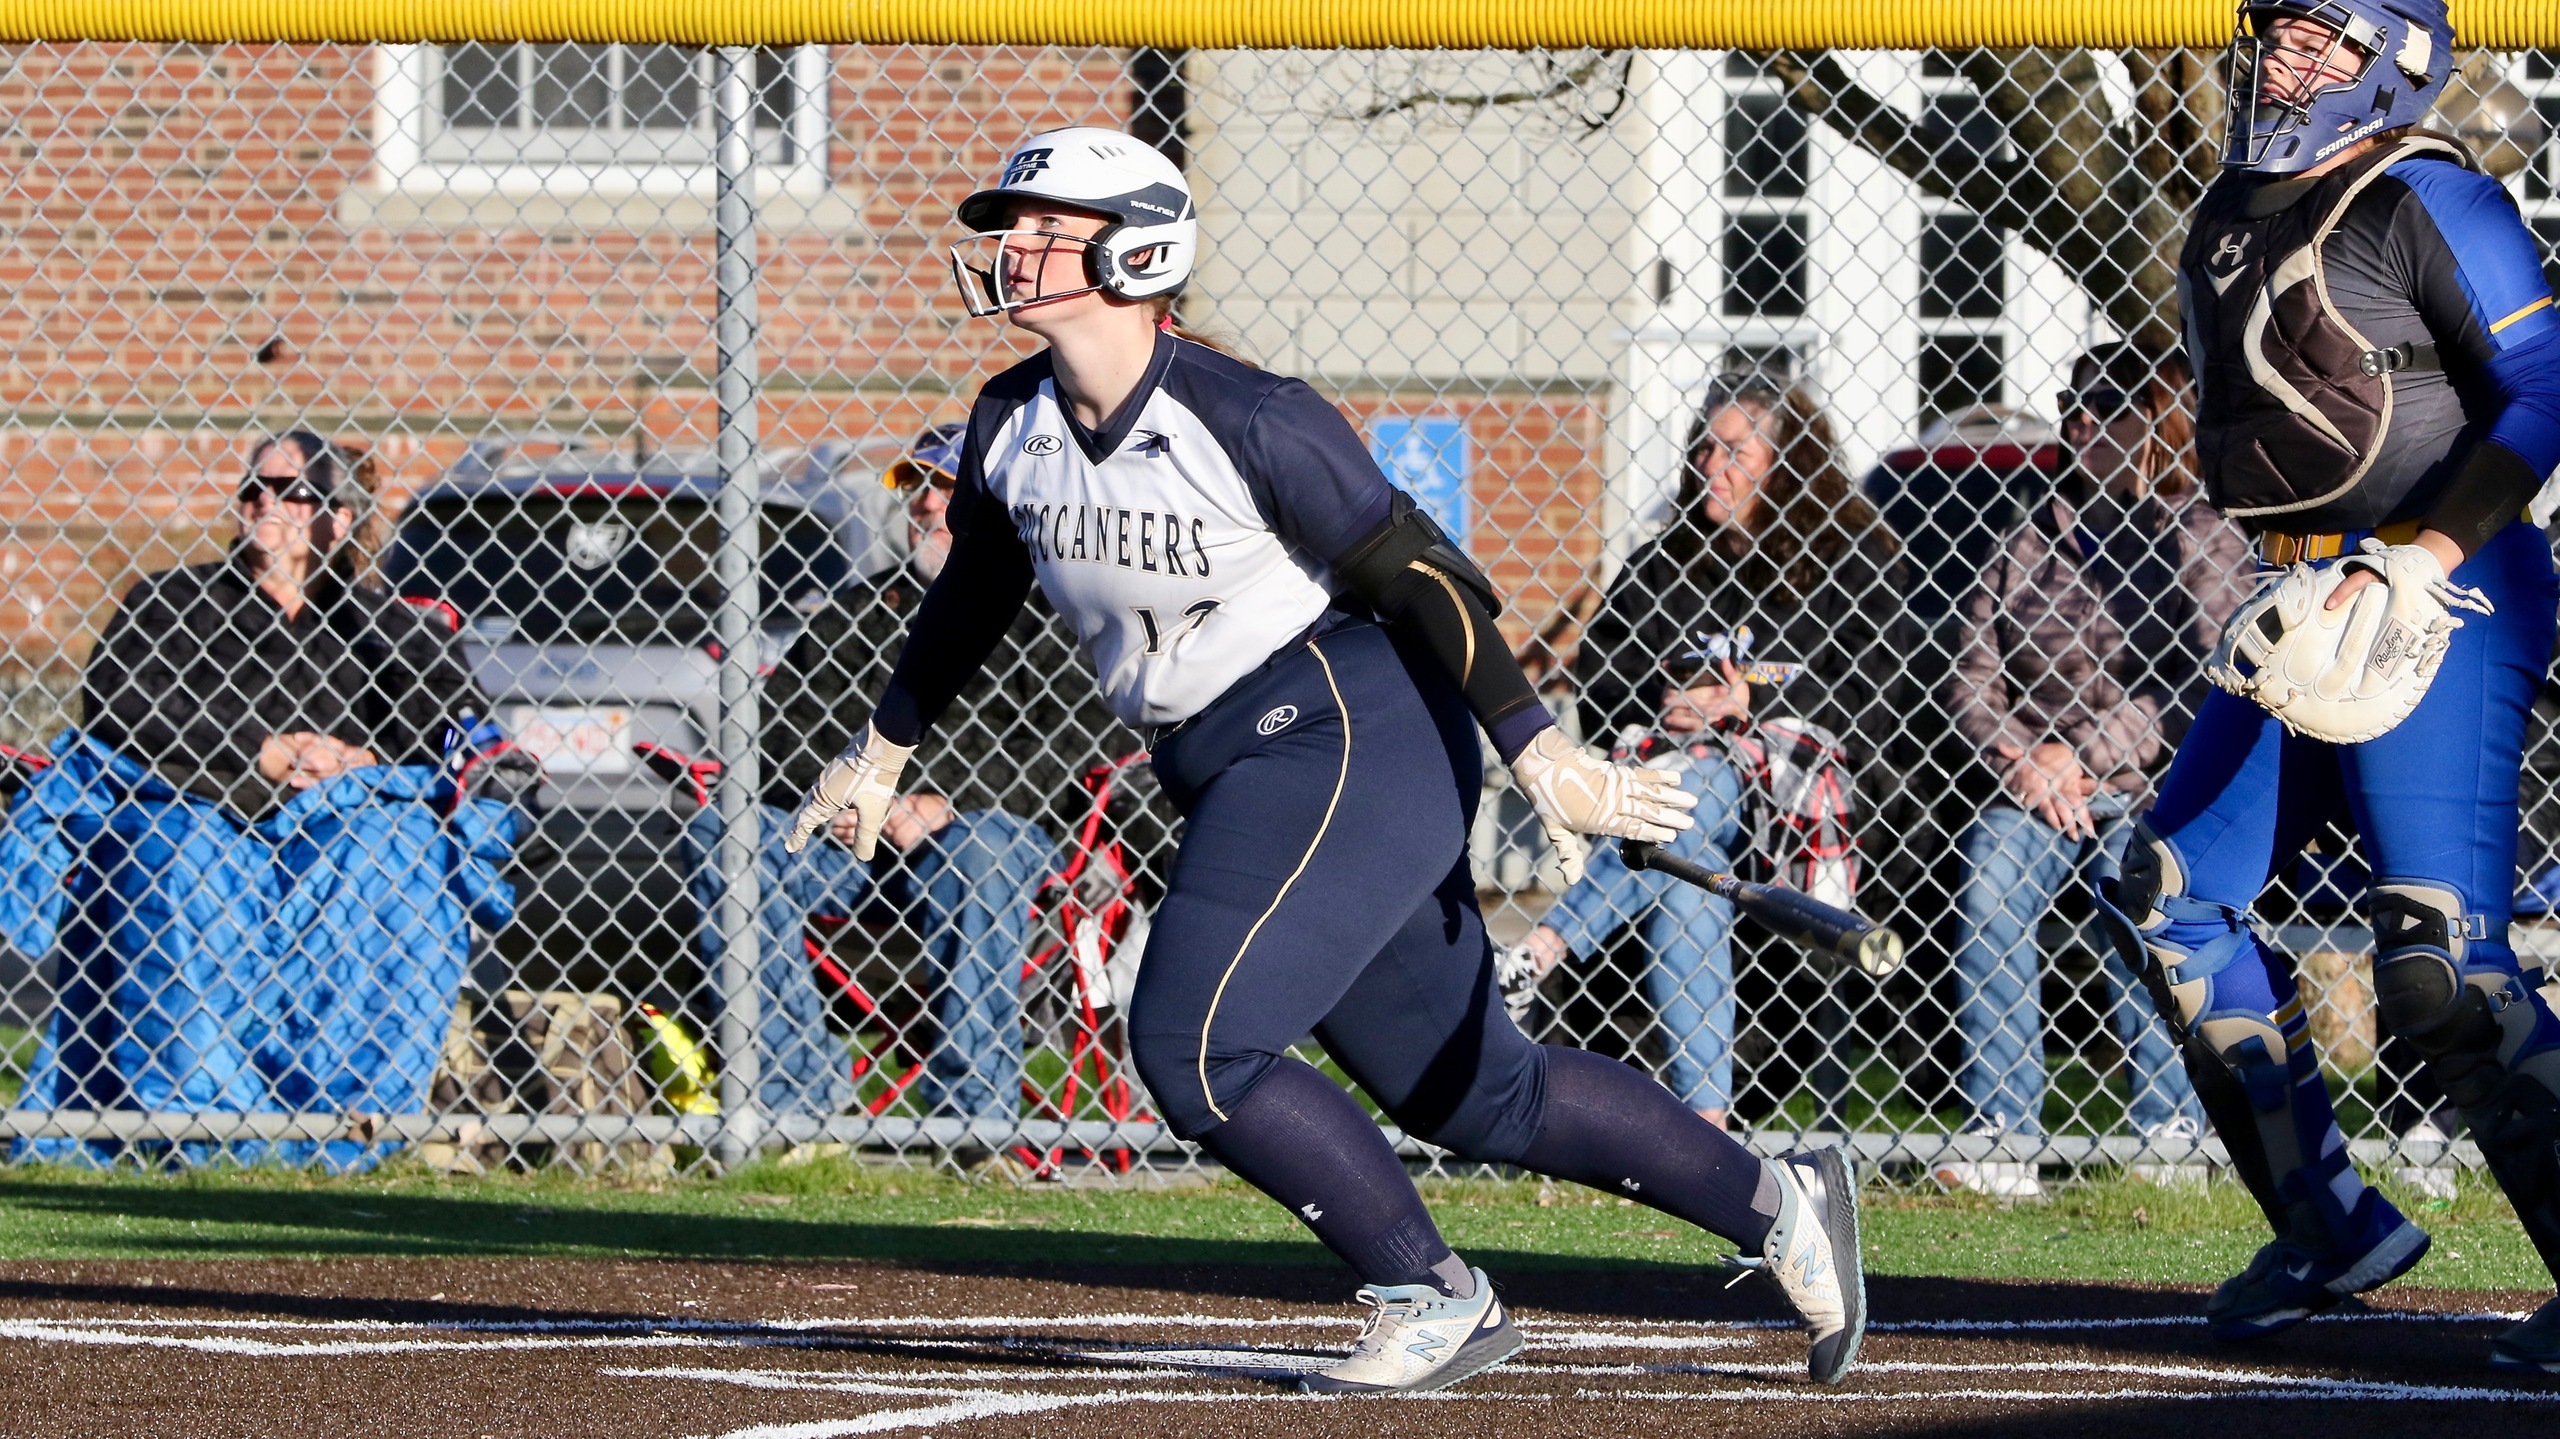 Booker Homers Twice in Conference Loses to Lancers